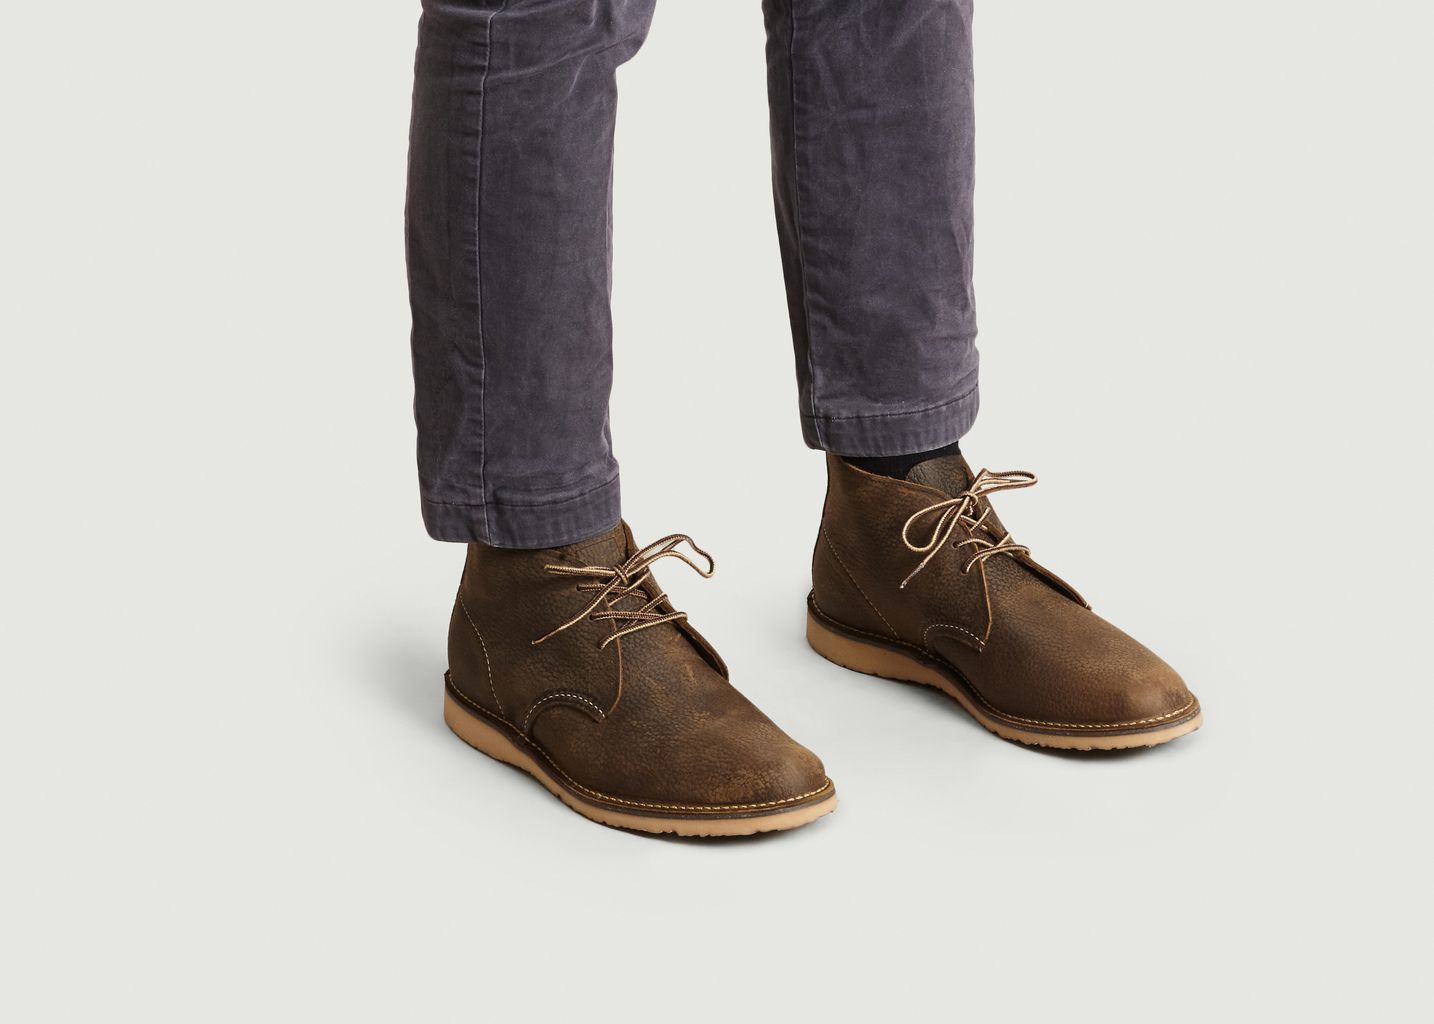 3327 Wekker Chukka Boots - Red Wing Shoes